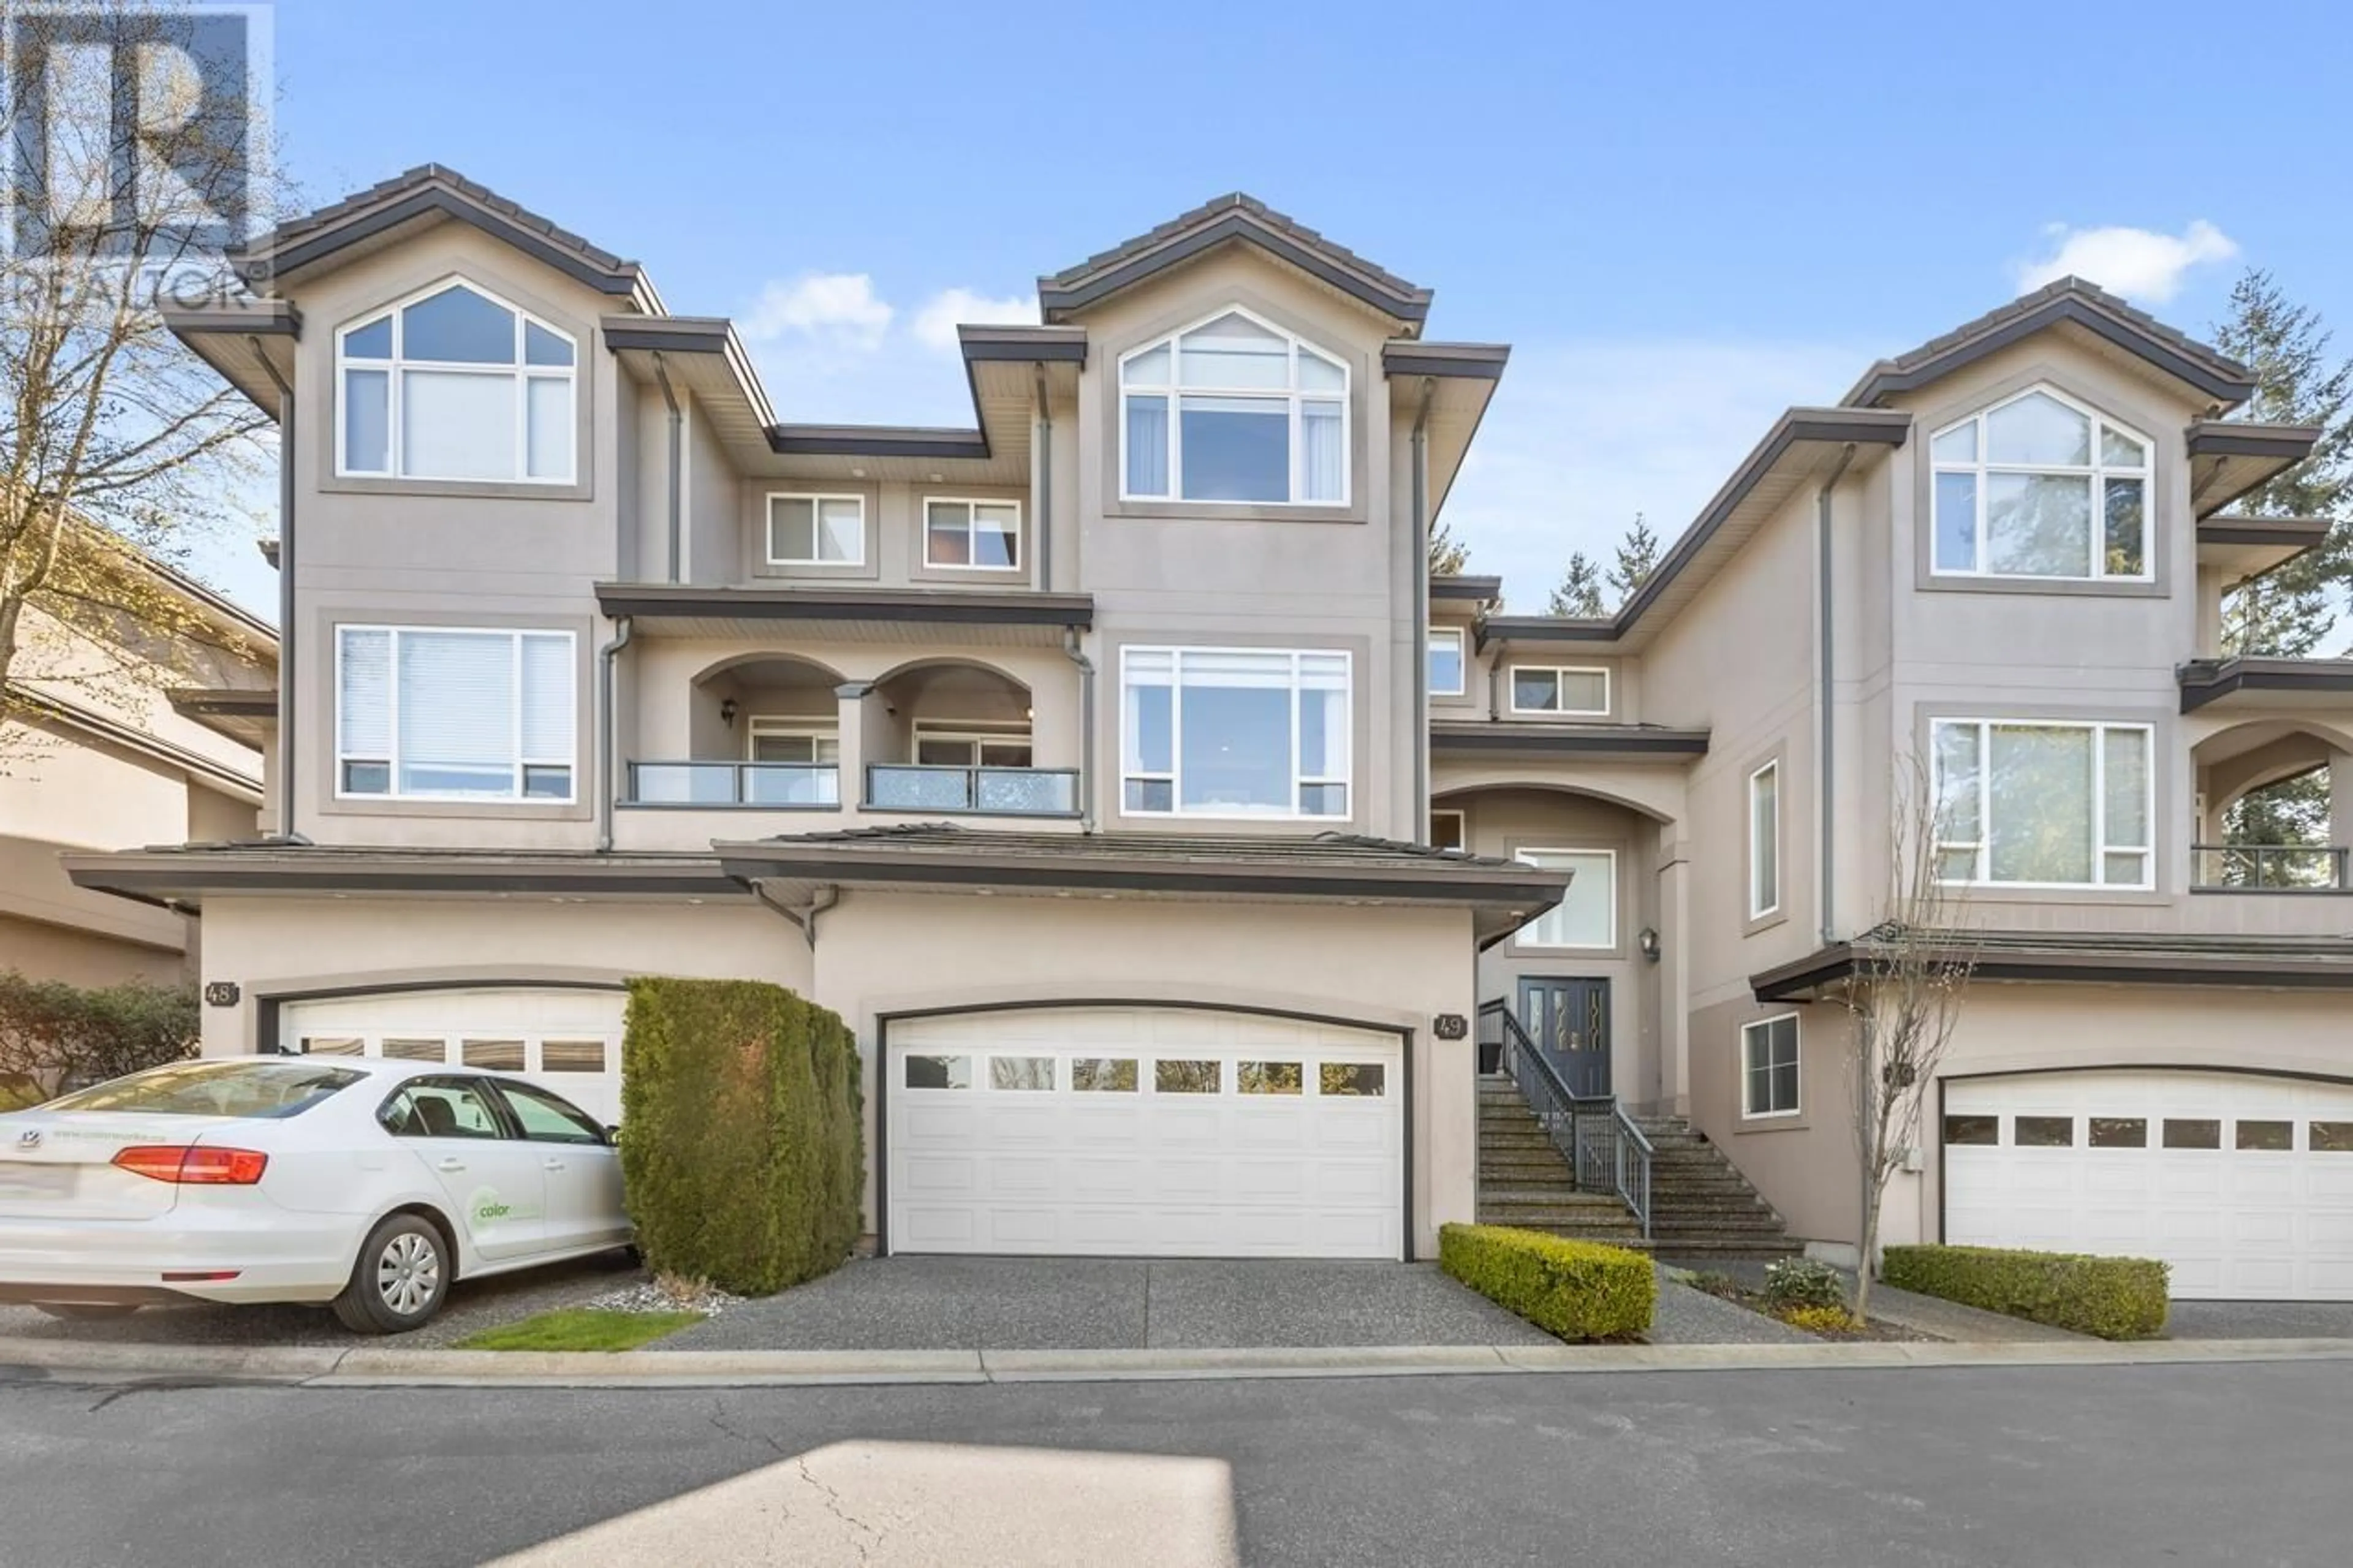 A pic from exterior of the house or condo for 49 678 CITADEL DRIVE, Port Coquitlam British Columbia V3C6M7